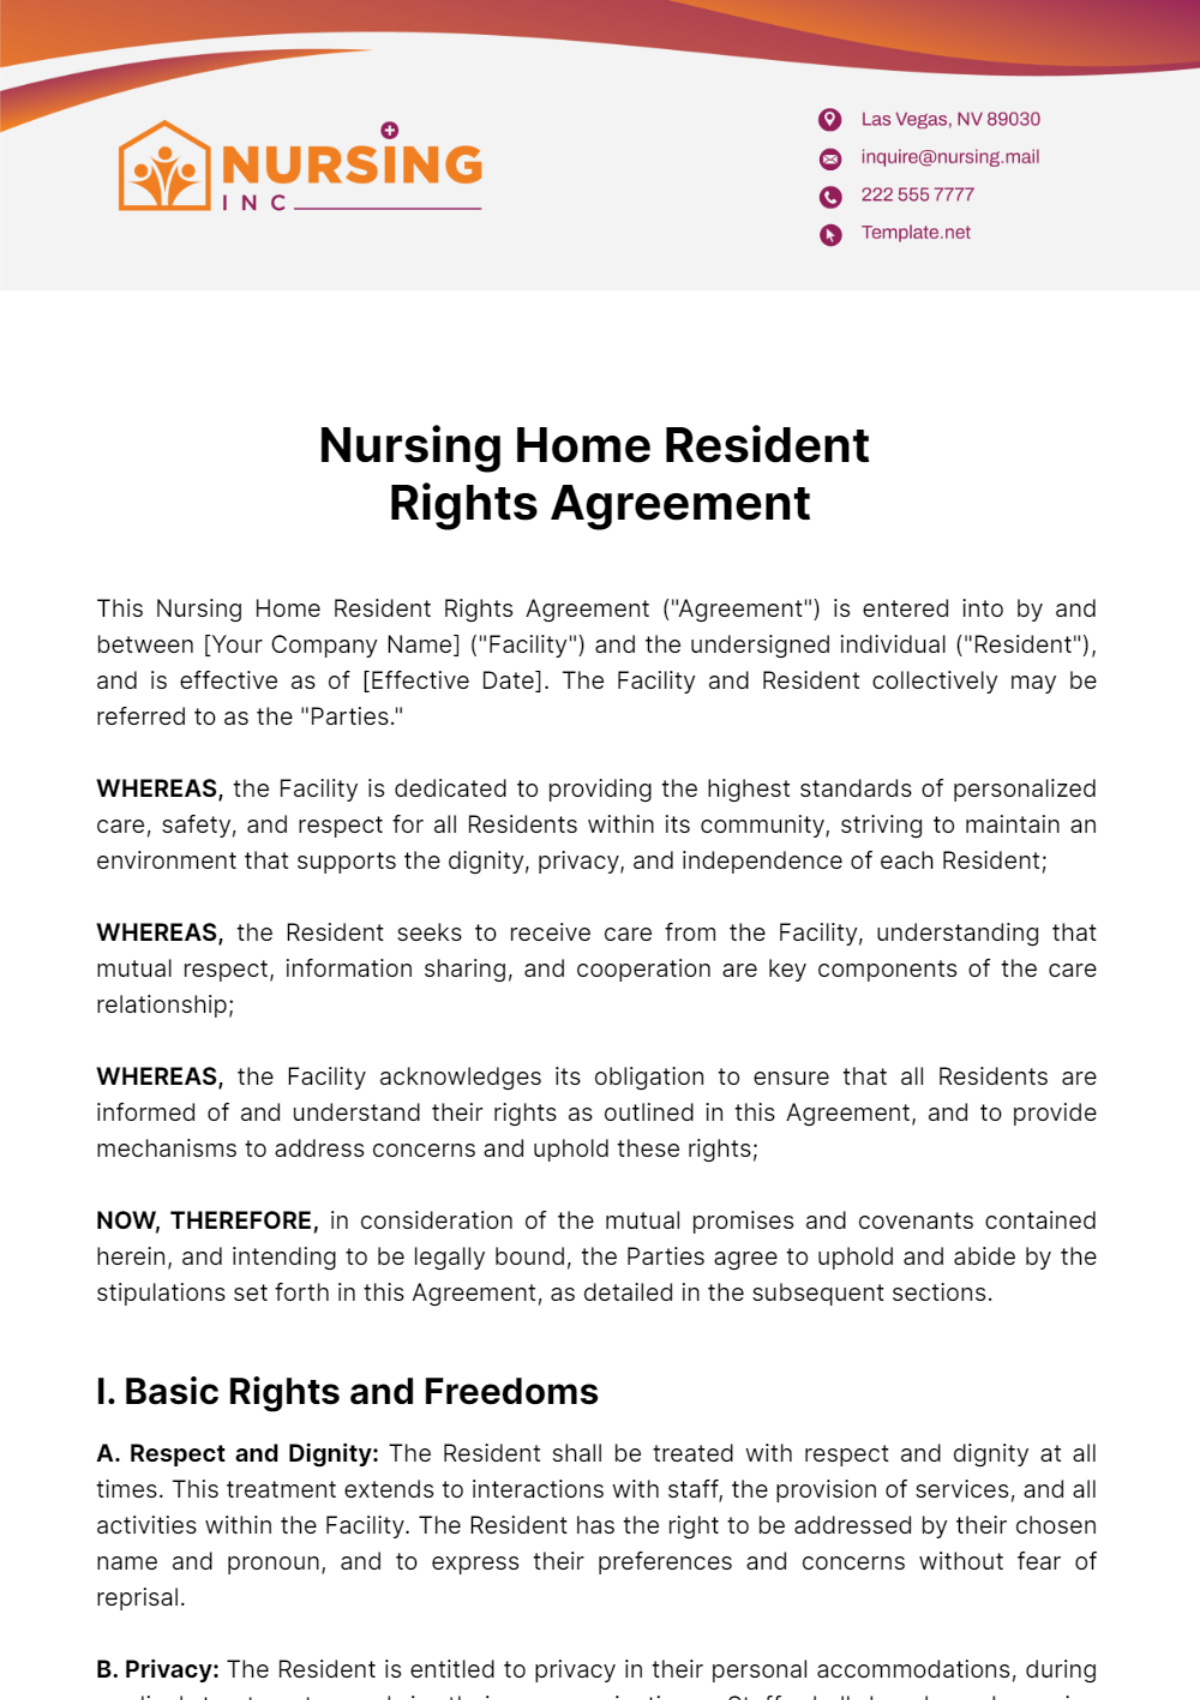 Free Nursing Home Resident Rights Agreement Template